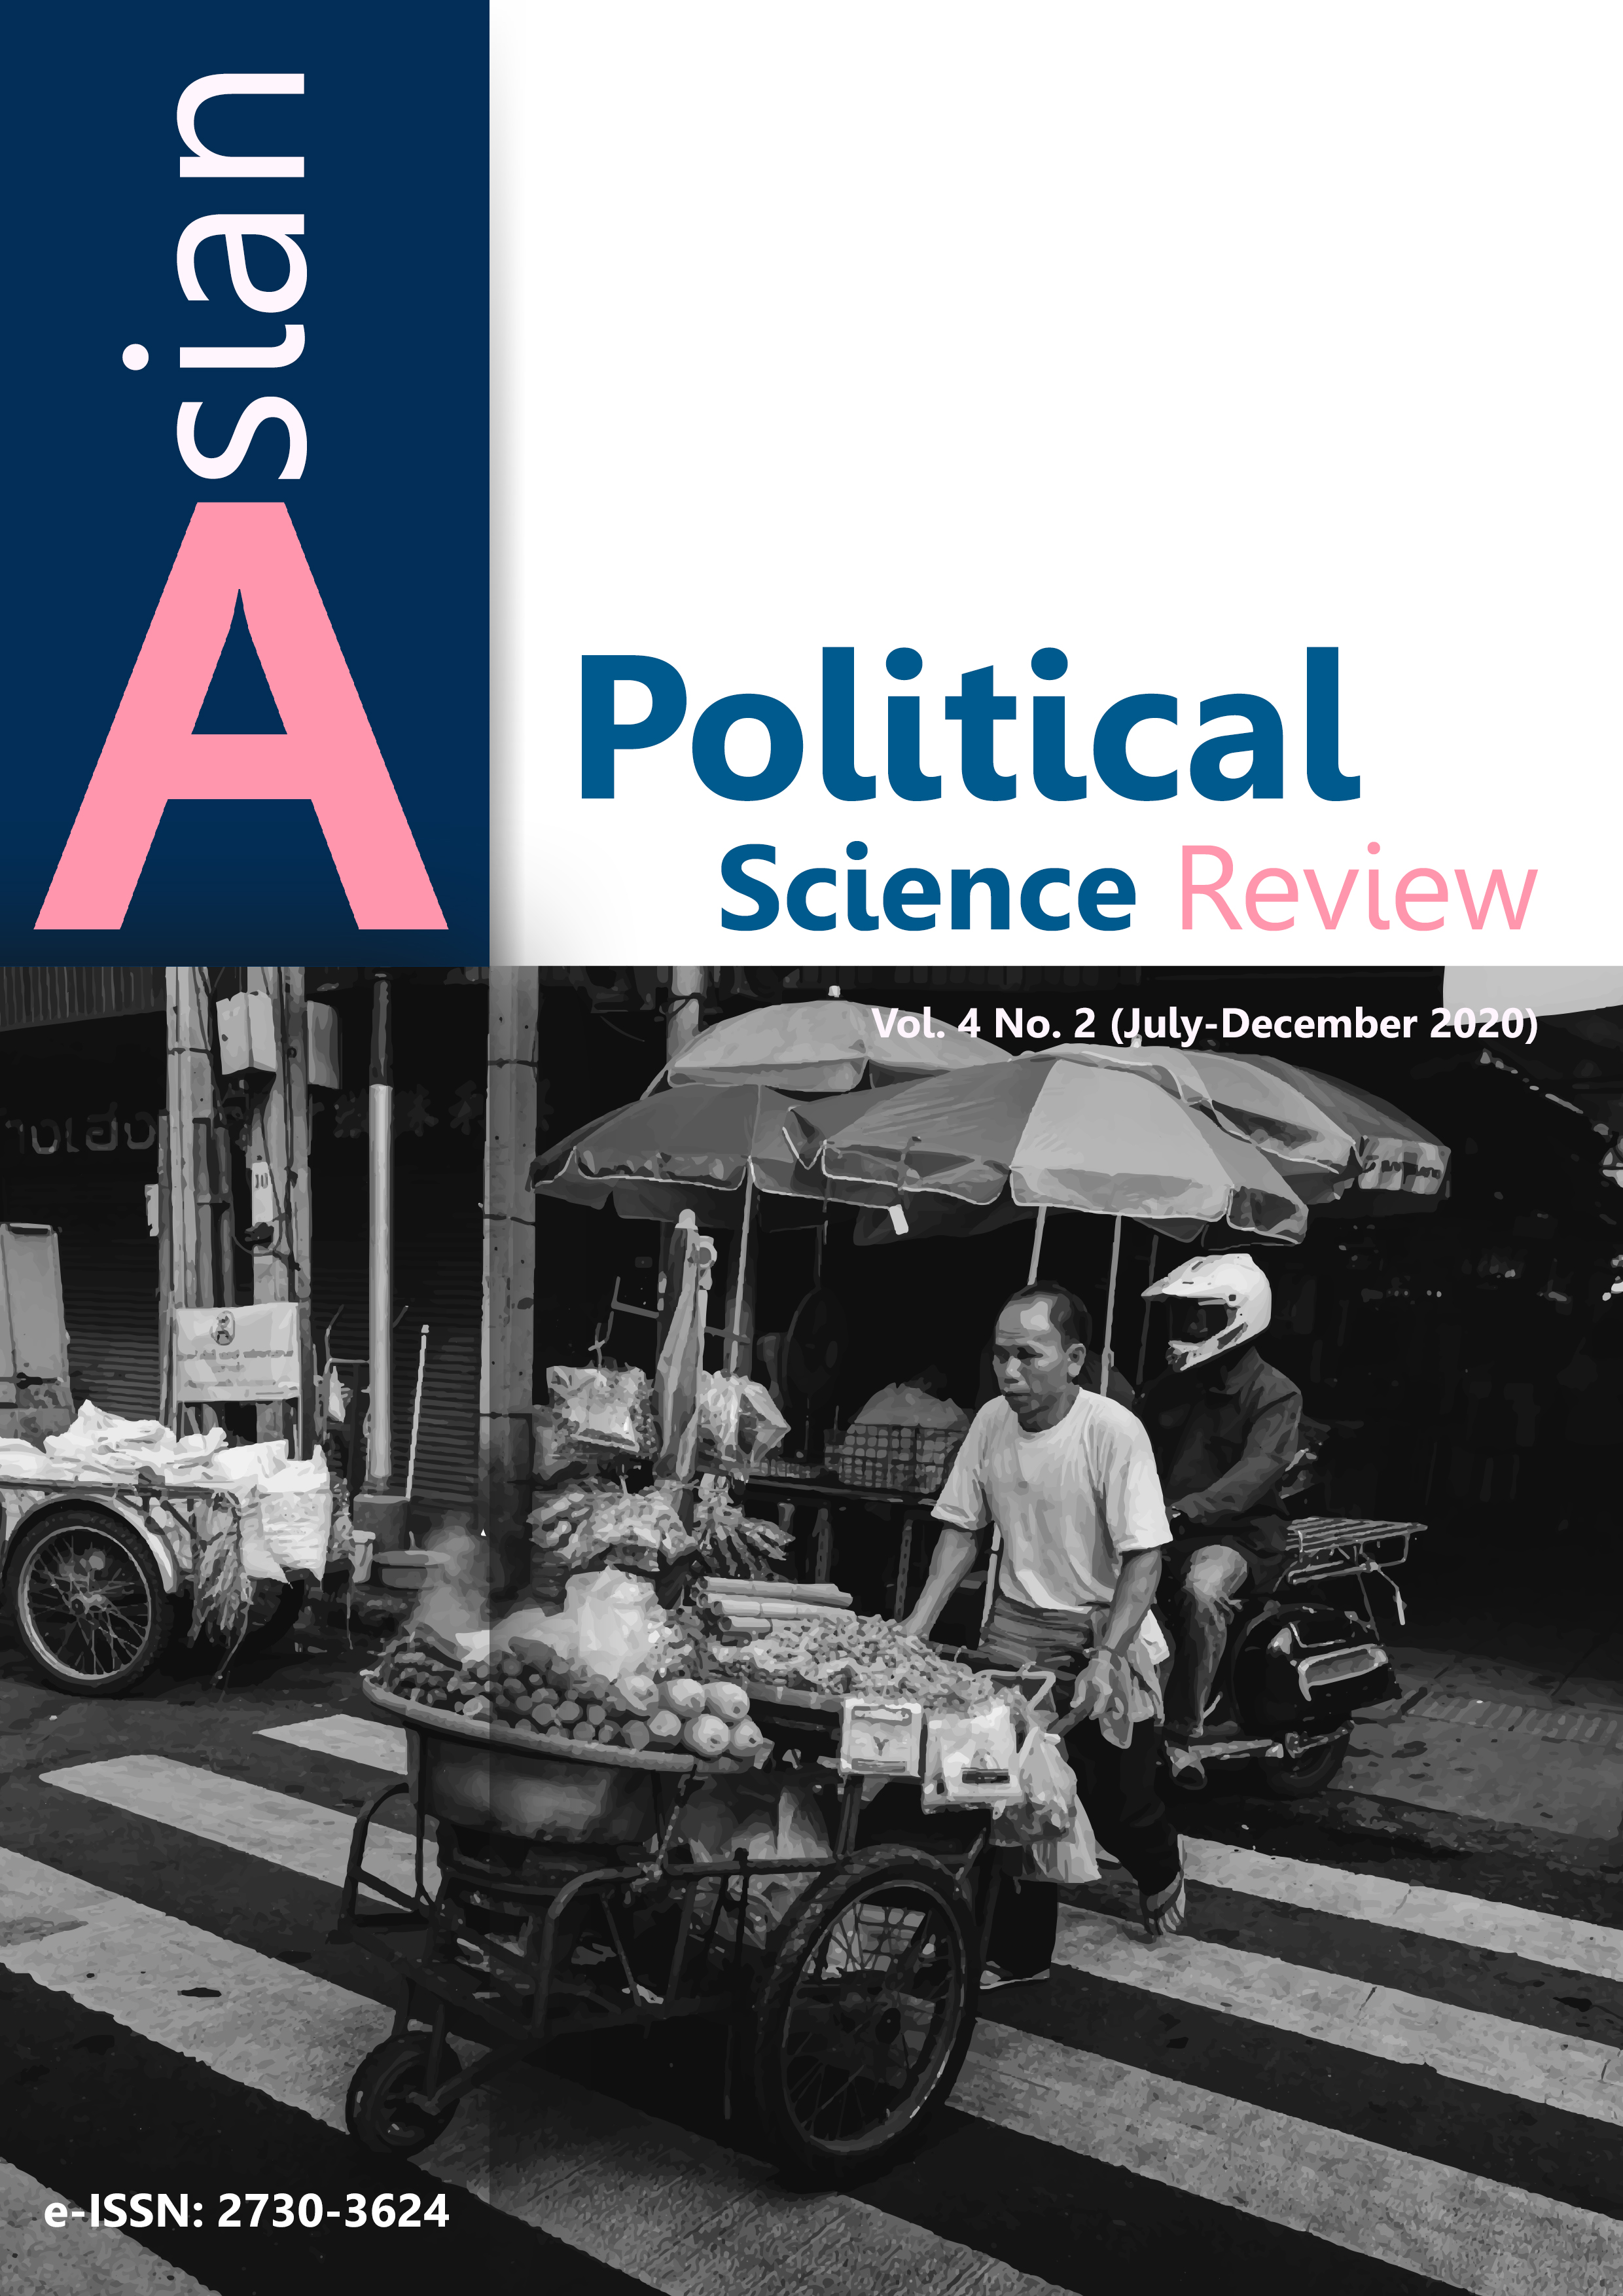 					View Vol. 4 No. 2 (2020): Asian Political Science Review
				